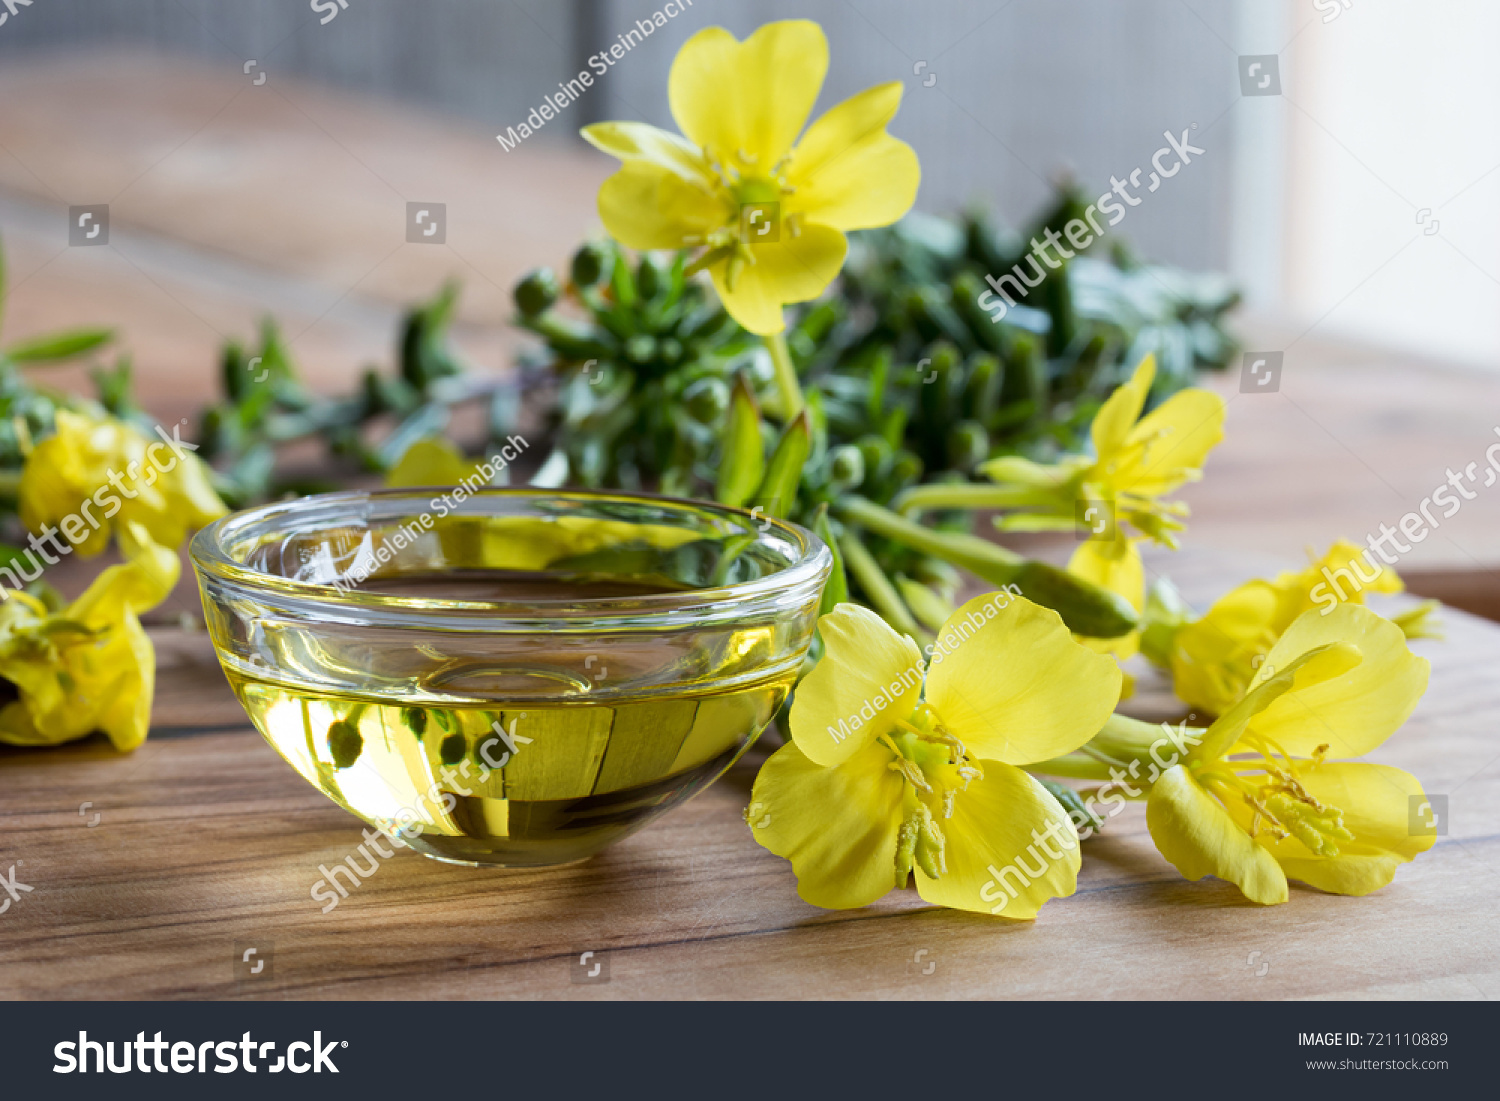 Evening primrose oil in a glass bowl, with fresh evening primrose flowers in the background #721110889